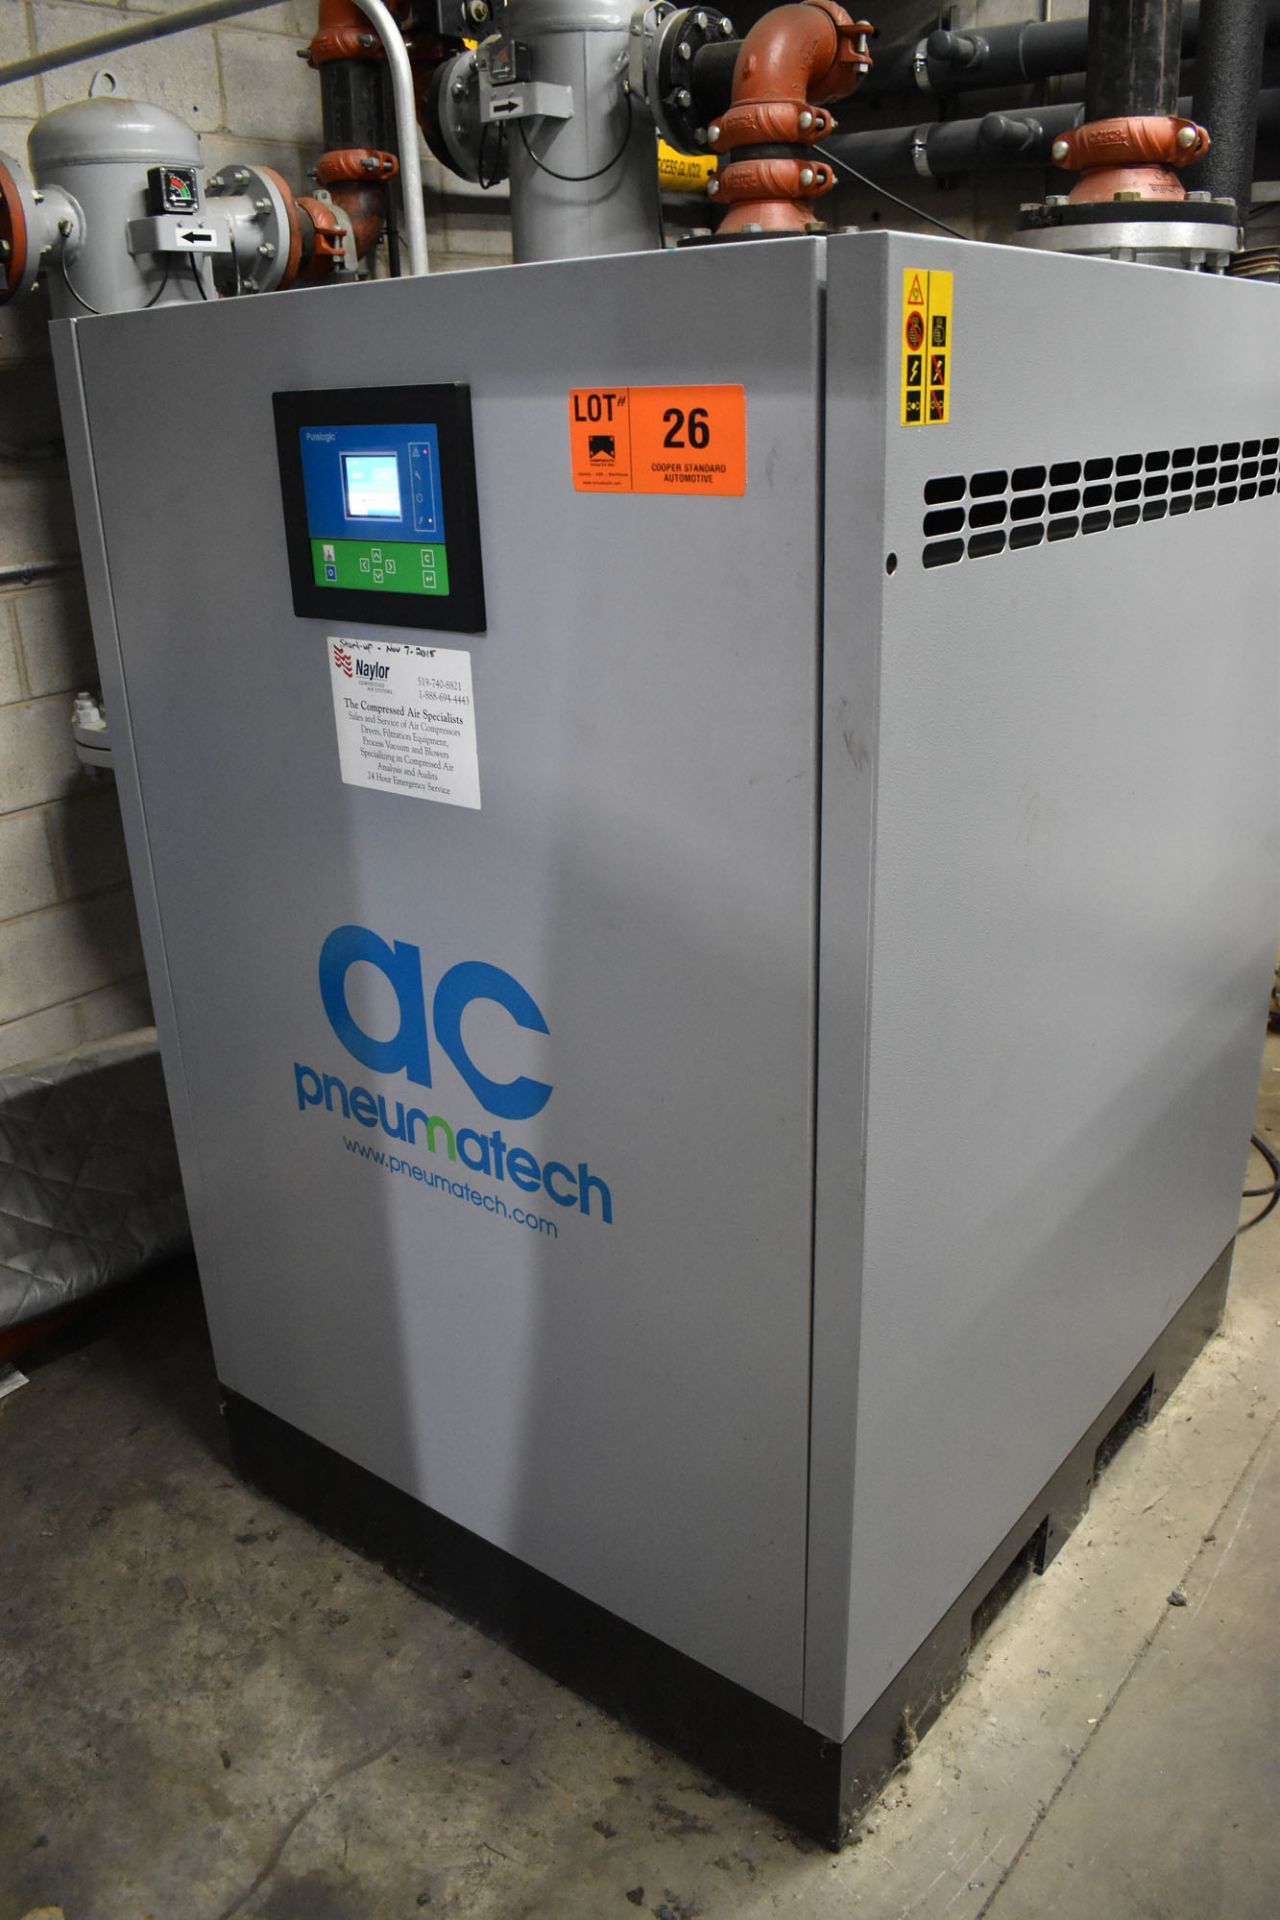 PNEUMATECH (2015) AC2100 REFRIGERATED AIR DRYER WITH PNEUMATECH IN-LINE AIR FILTER, S/N: